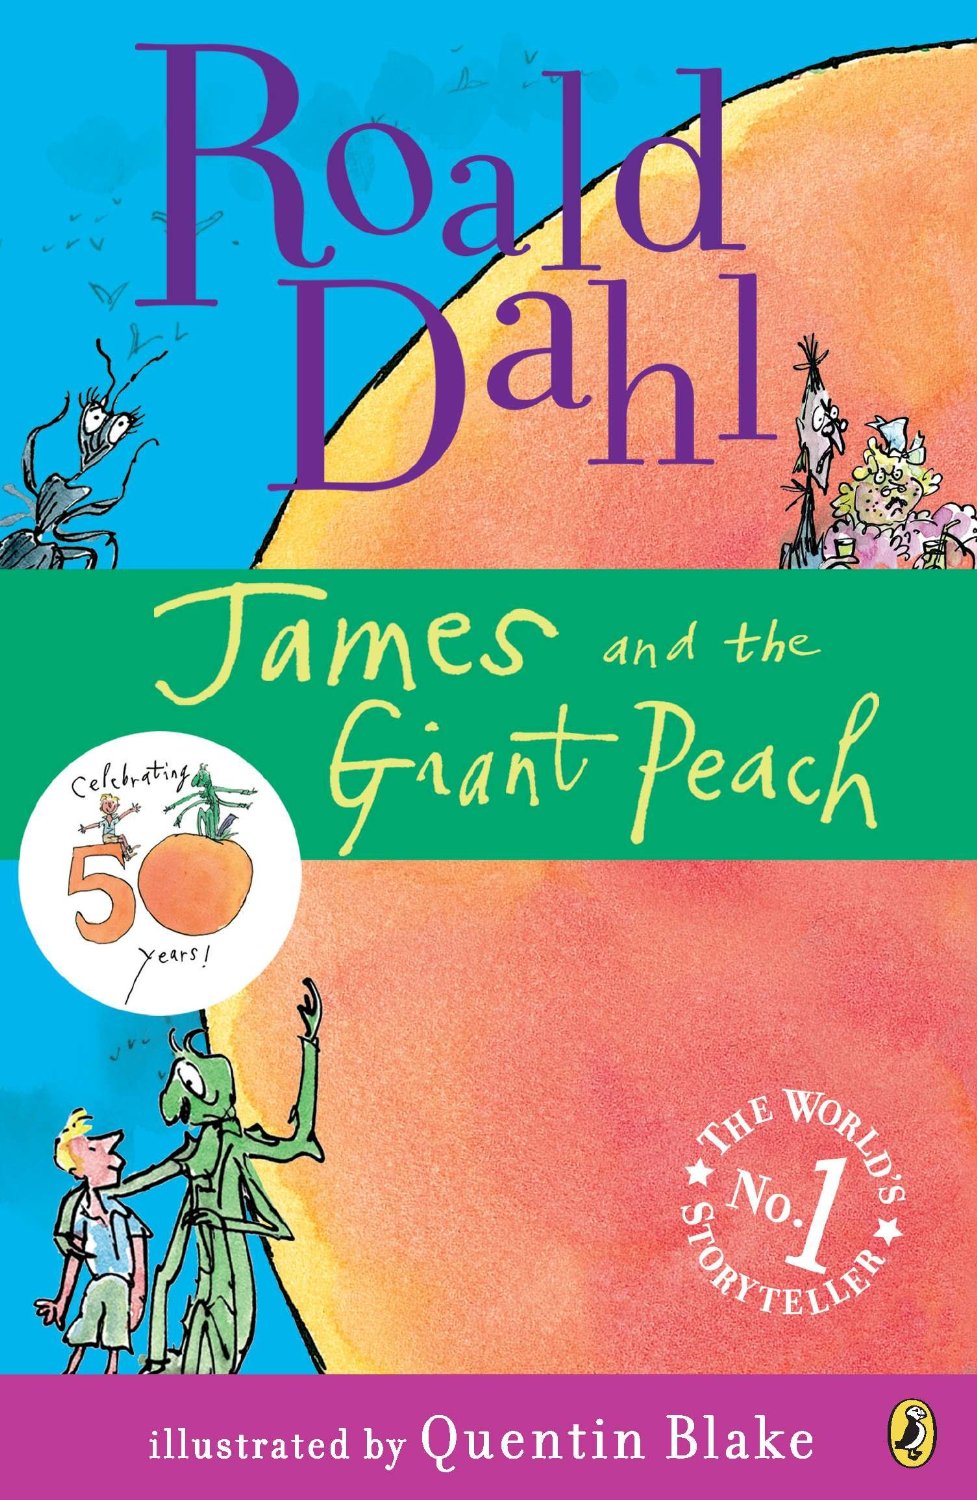 book review of james and the giant peach